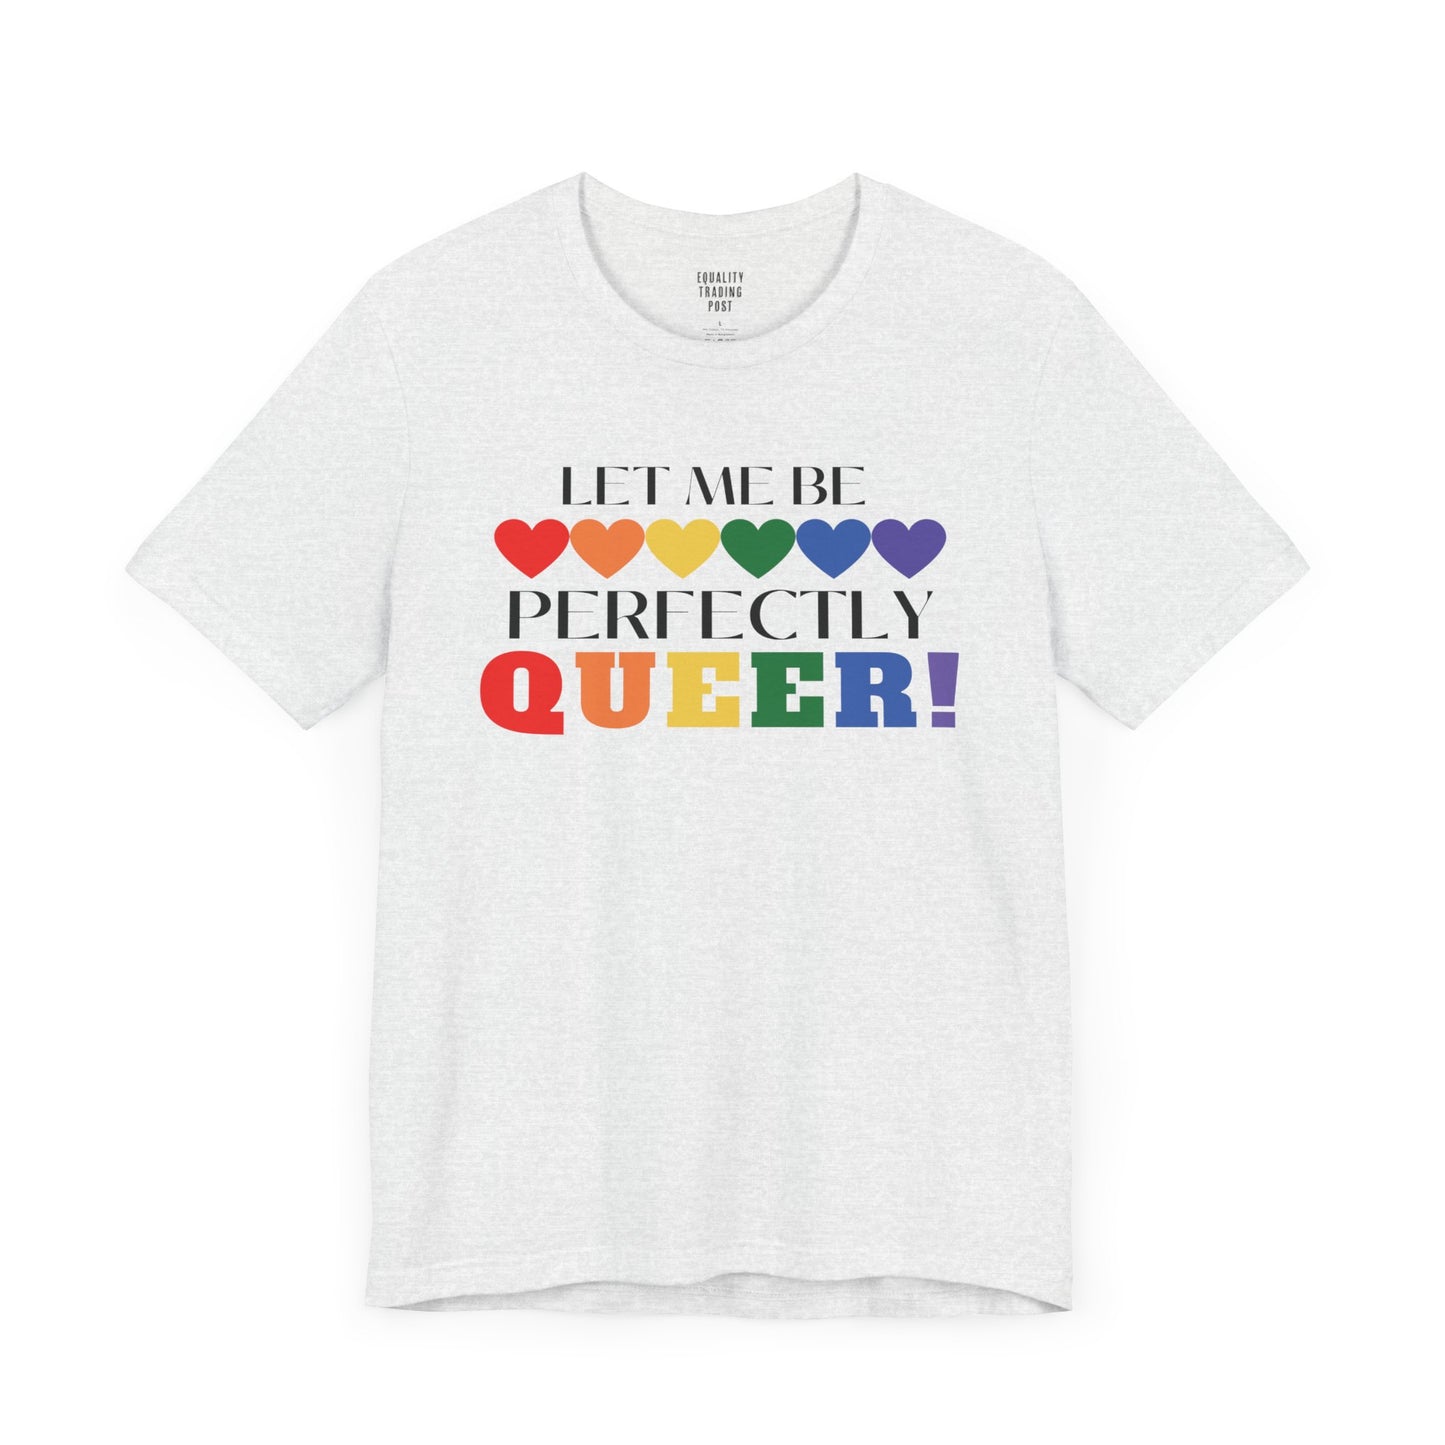 Let Me Be Perfectly Queer Tee